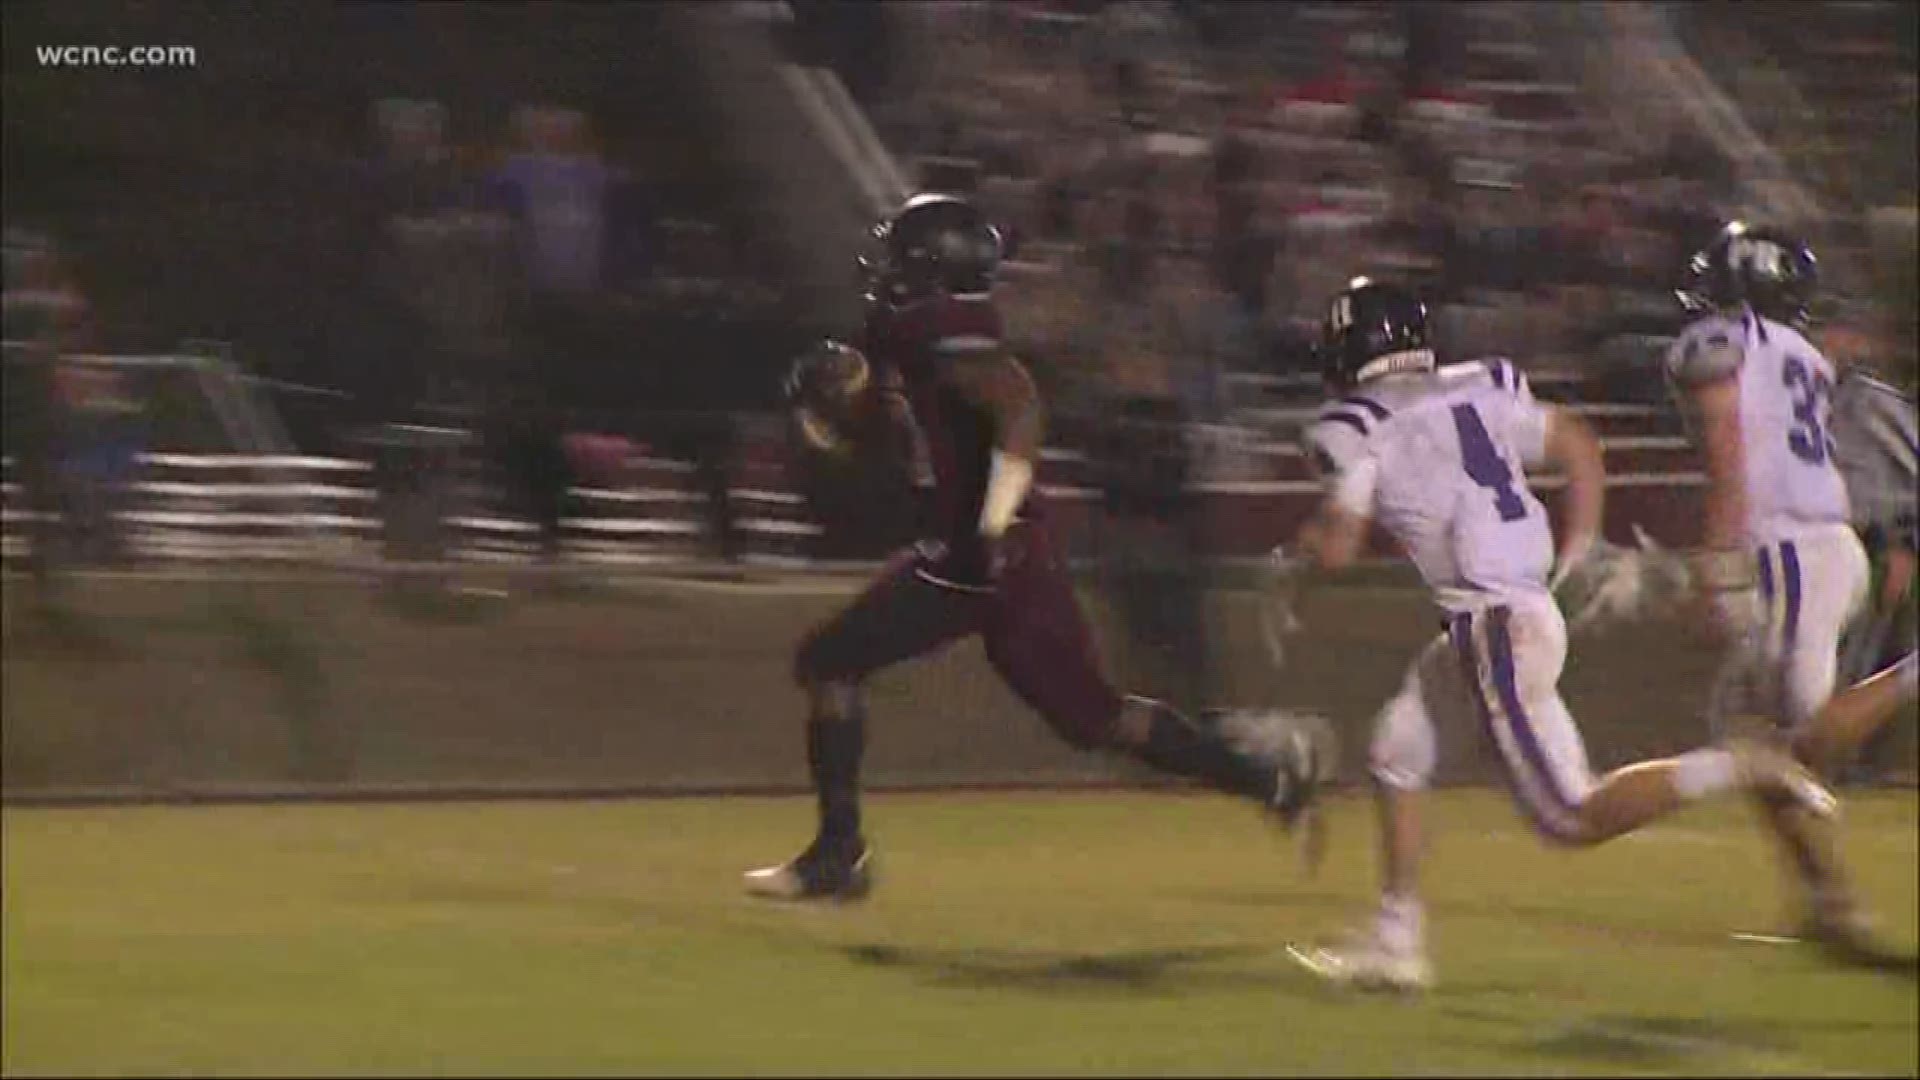 Harding's magical season continued with a hard-fought win over Porter Ridge in the 4A playoffs.